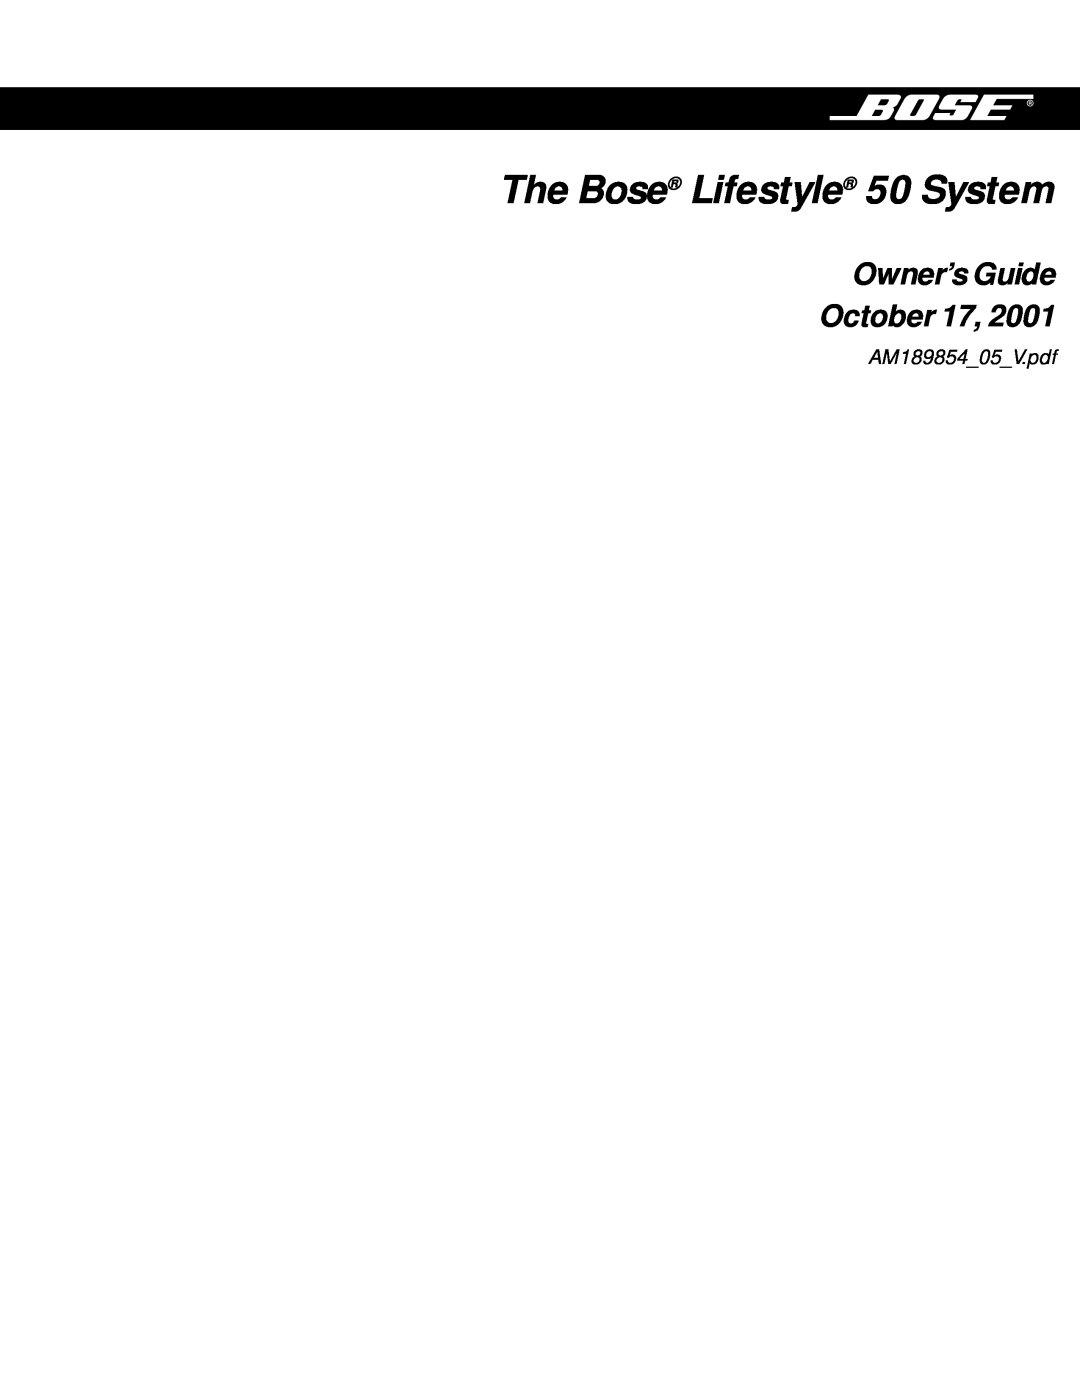 Bose manual The Bose Lifestyle 50 System, Owner’s Guide October 